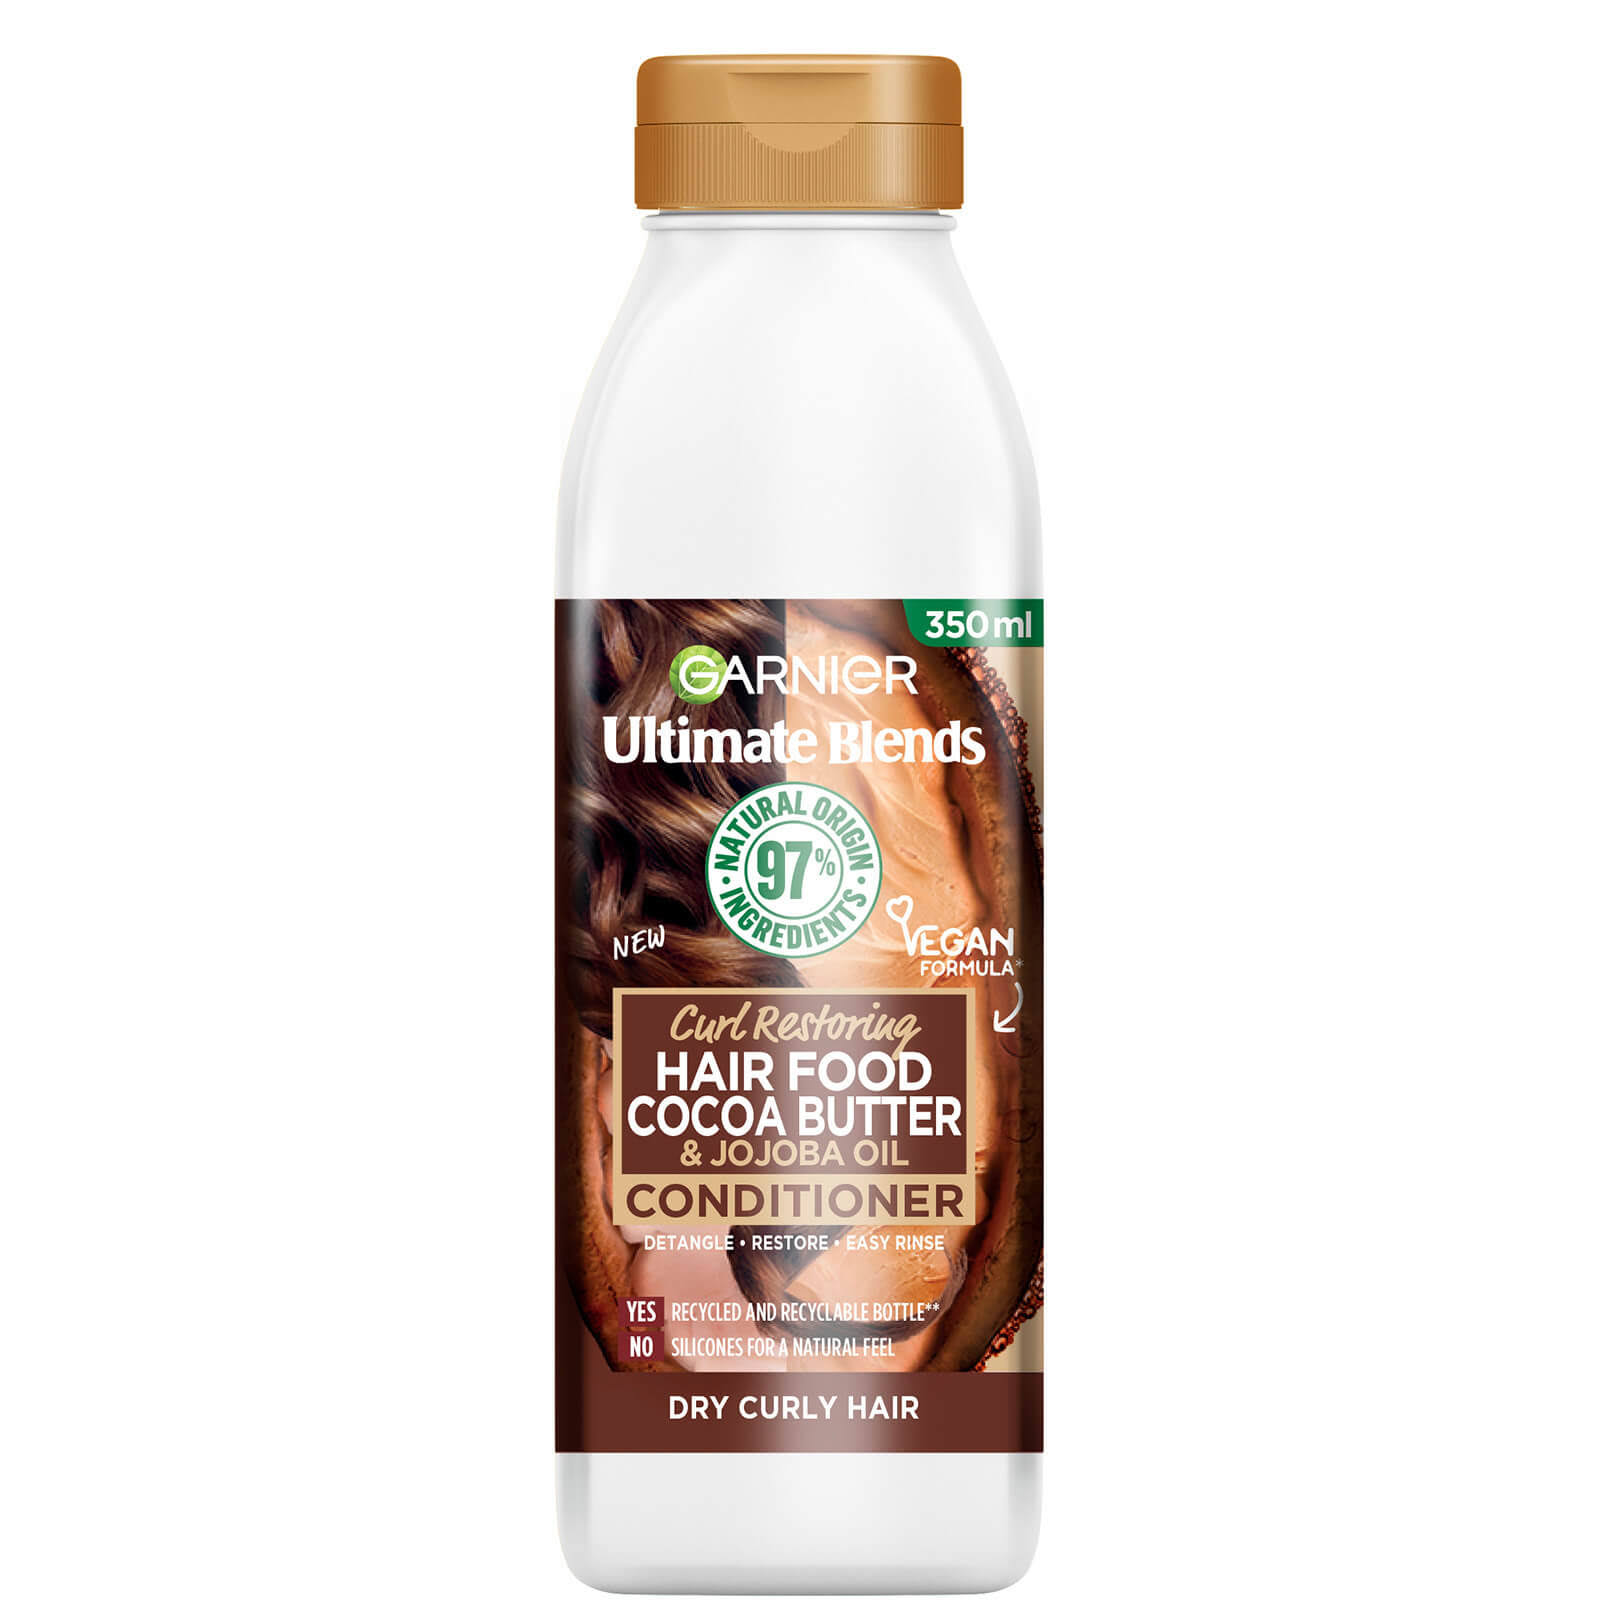 Garnier Ultimate Blends Hair Food Cocoa Butter Conditioner 350ml